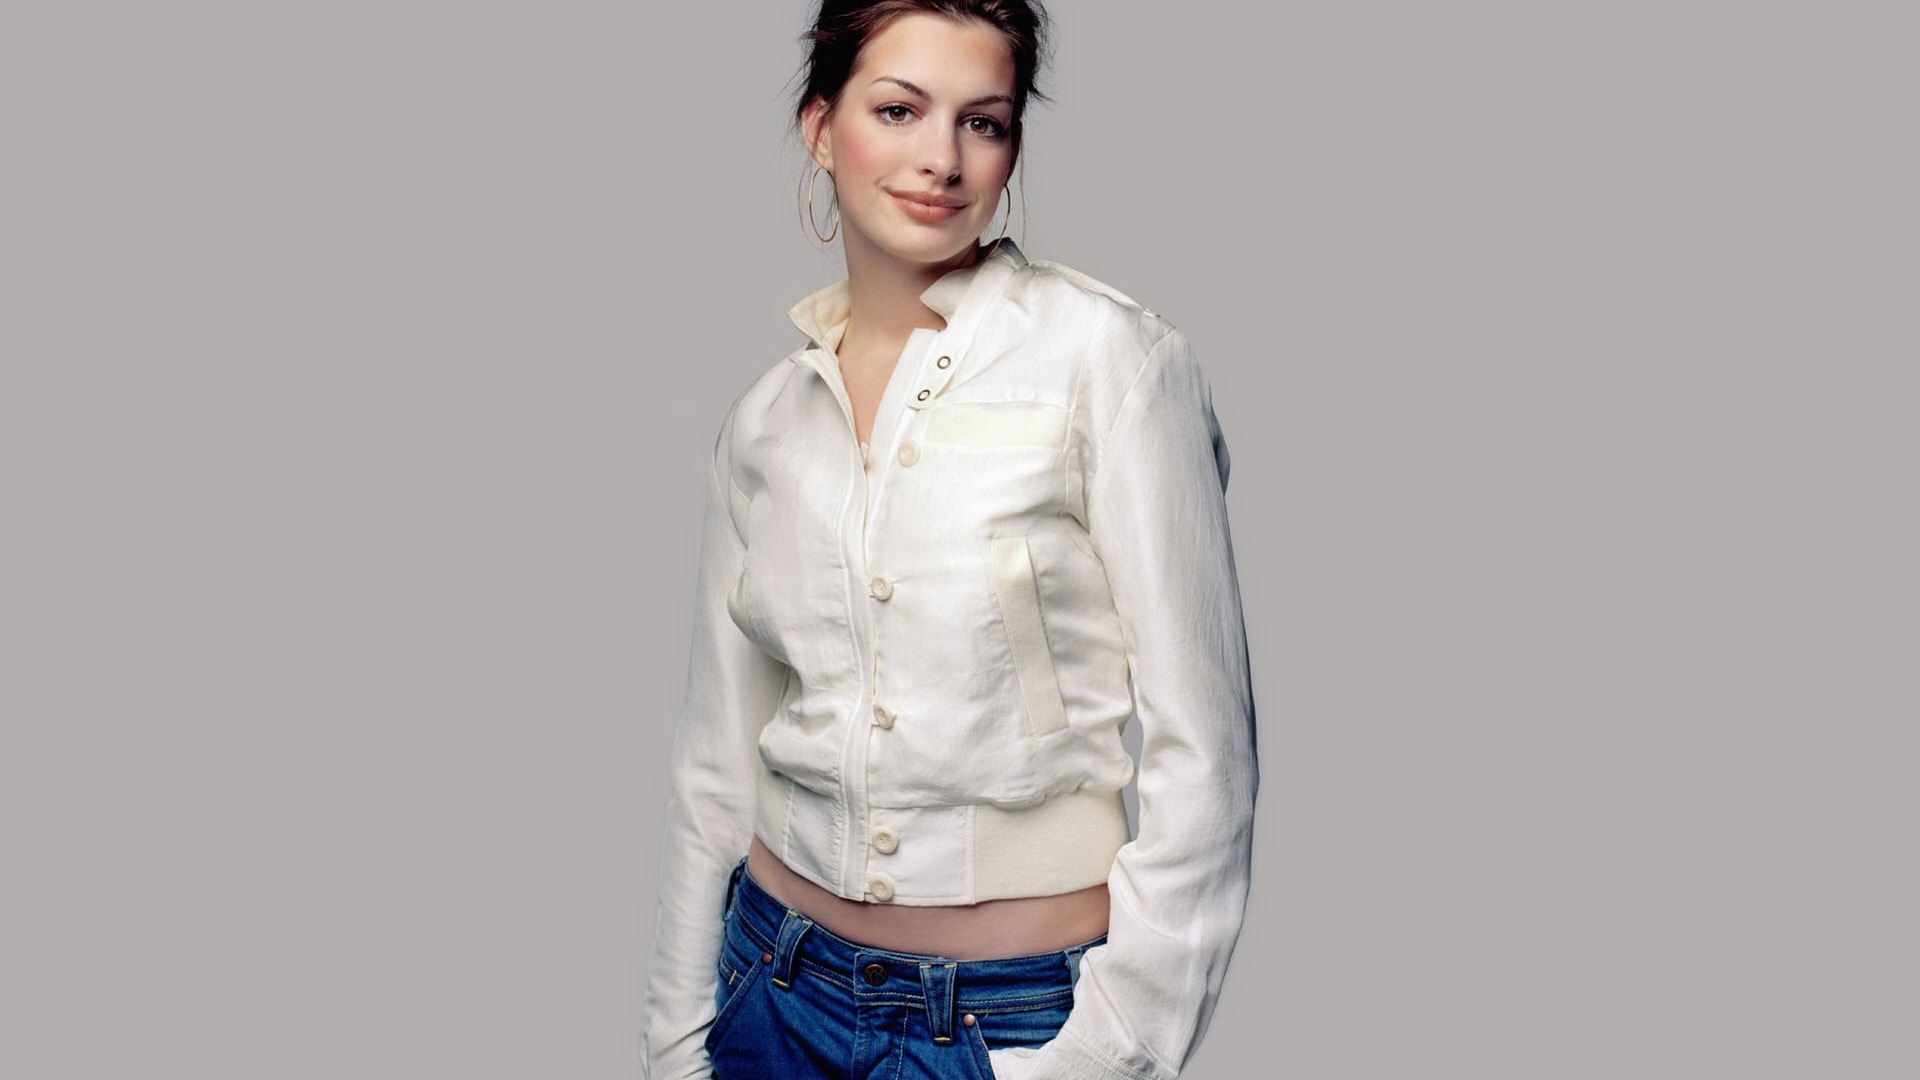 Anne Hathaway #015 - 1920x1080 Wallpapers Pictures Photos Images